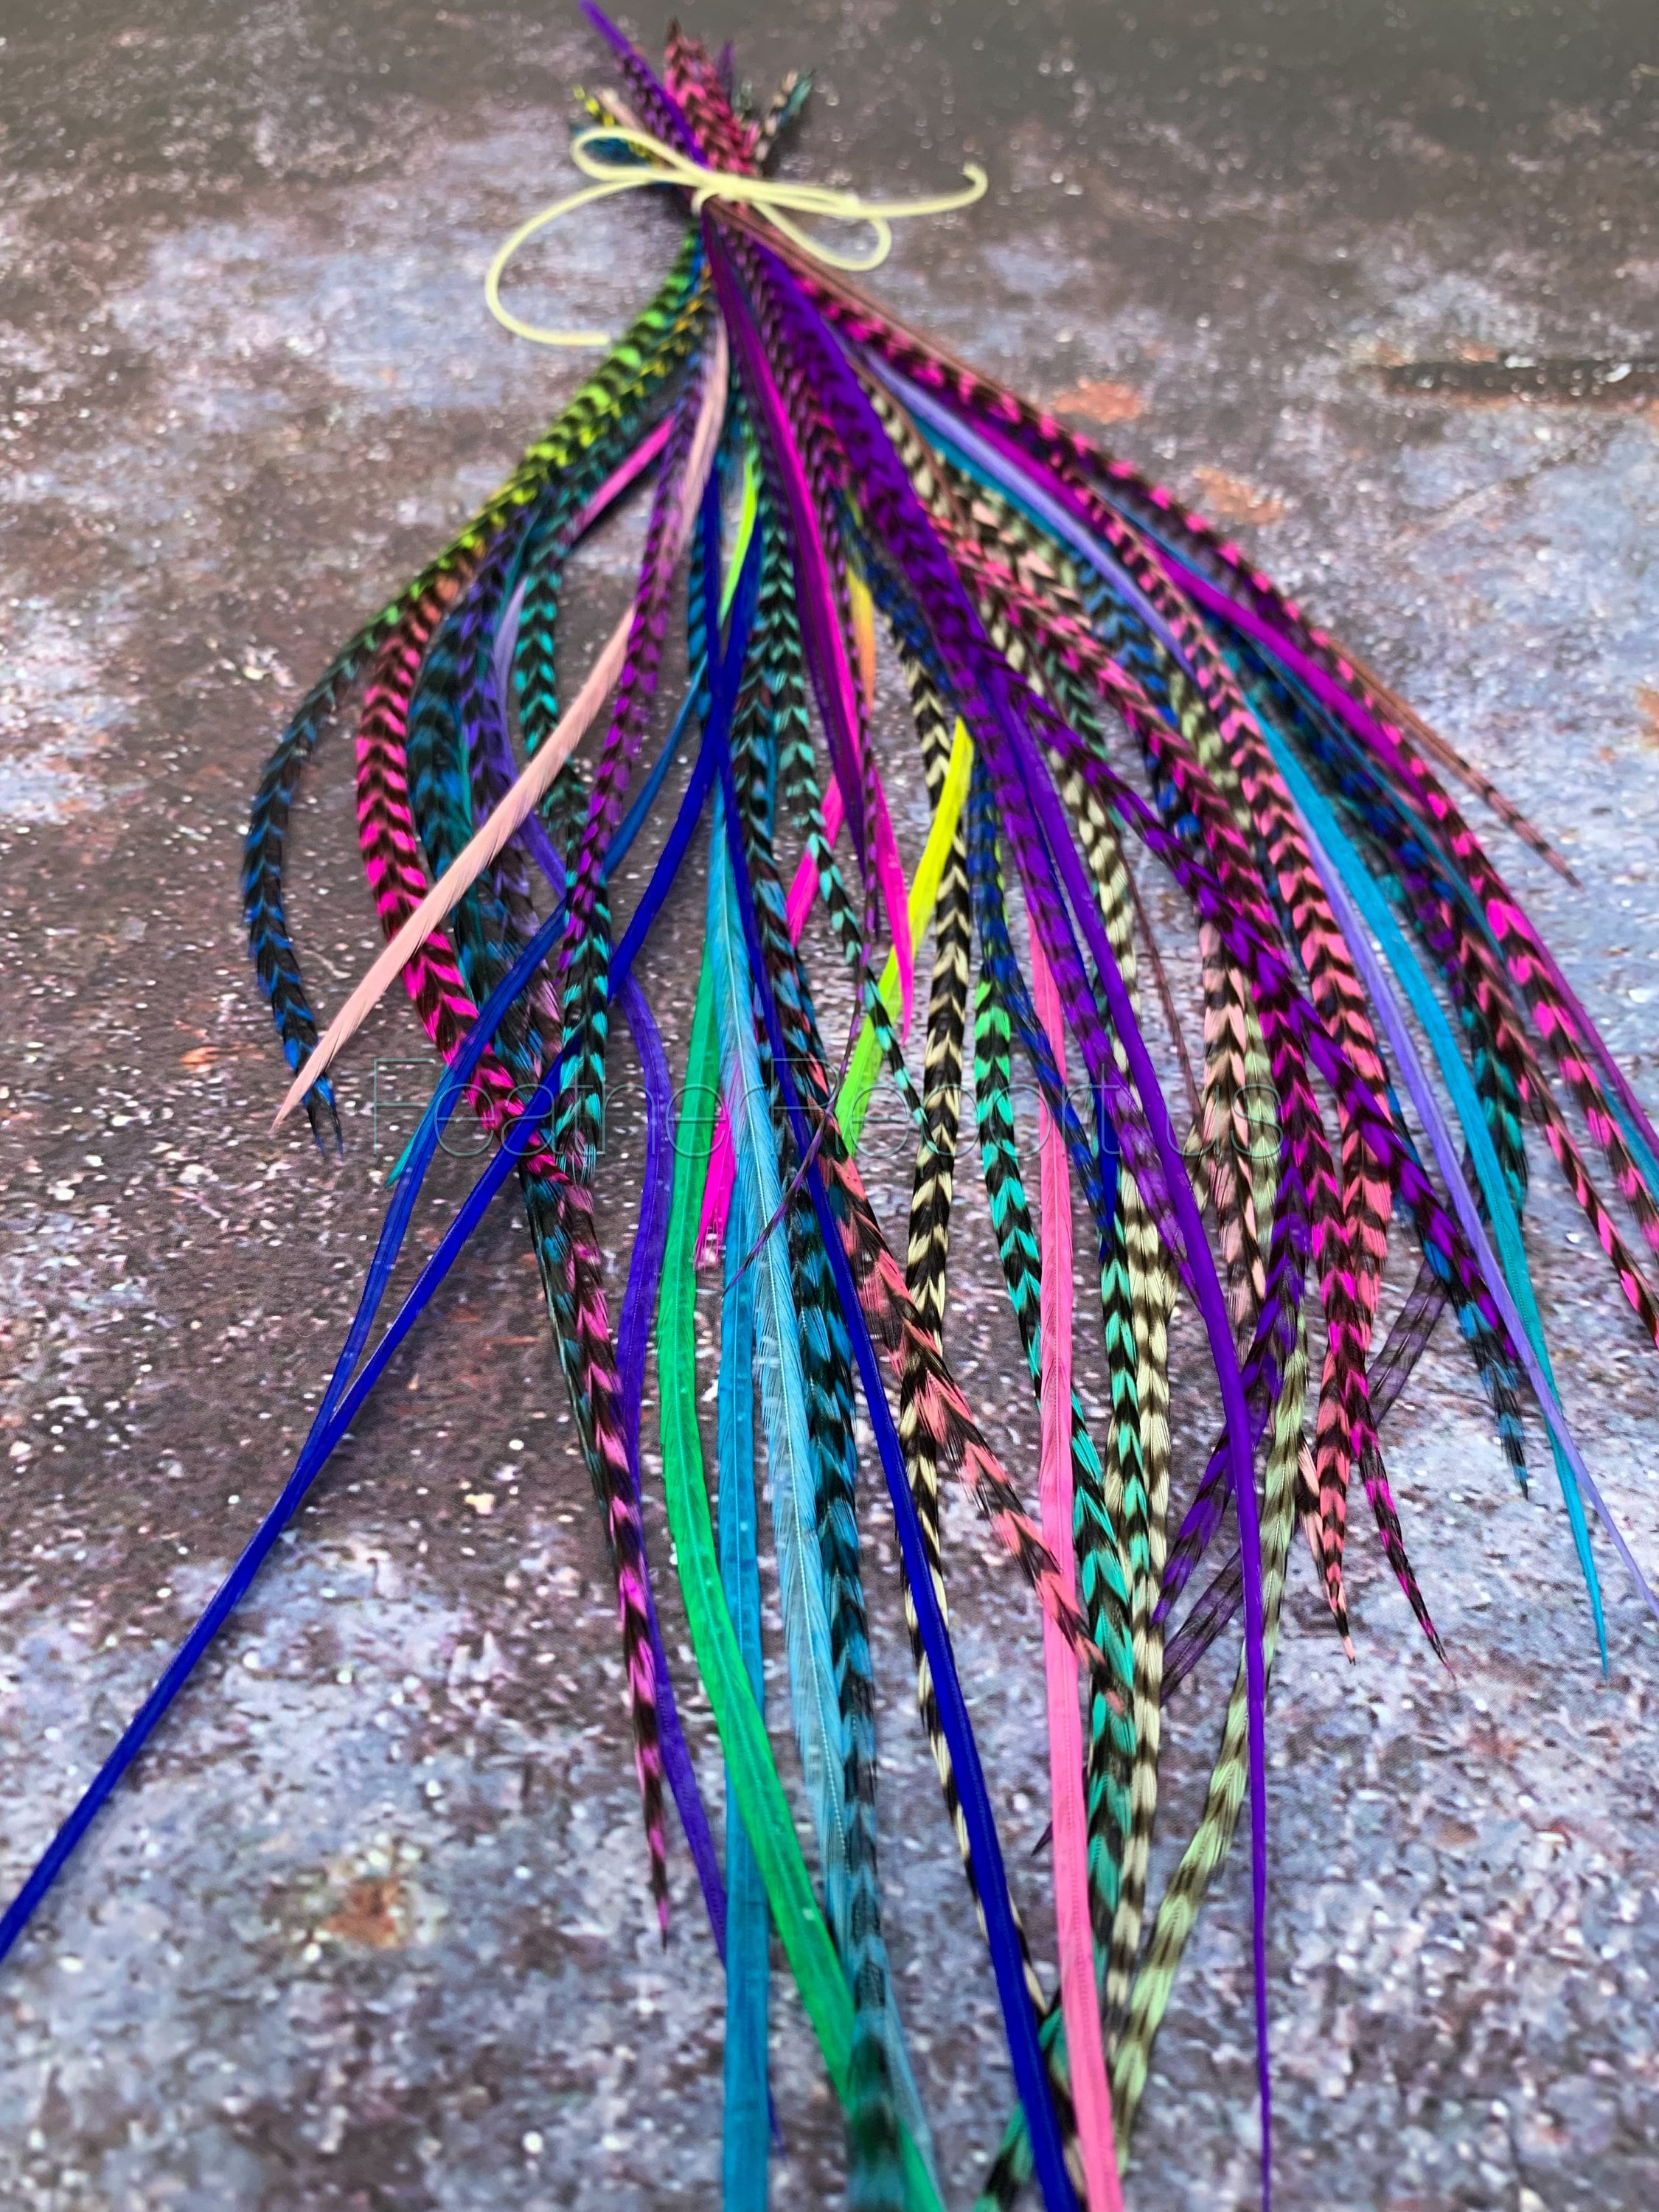 Bulk Hair Feathers Popular Colors Long Feather Extensions Rainbow Blue  Violet Pink Natural Grizzly Turquoise Feather Hair Extensions x 50